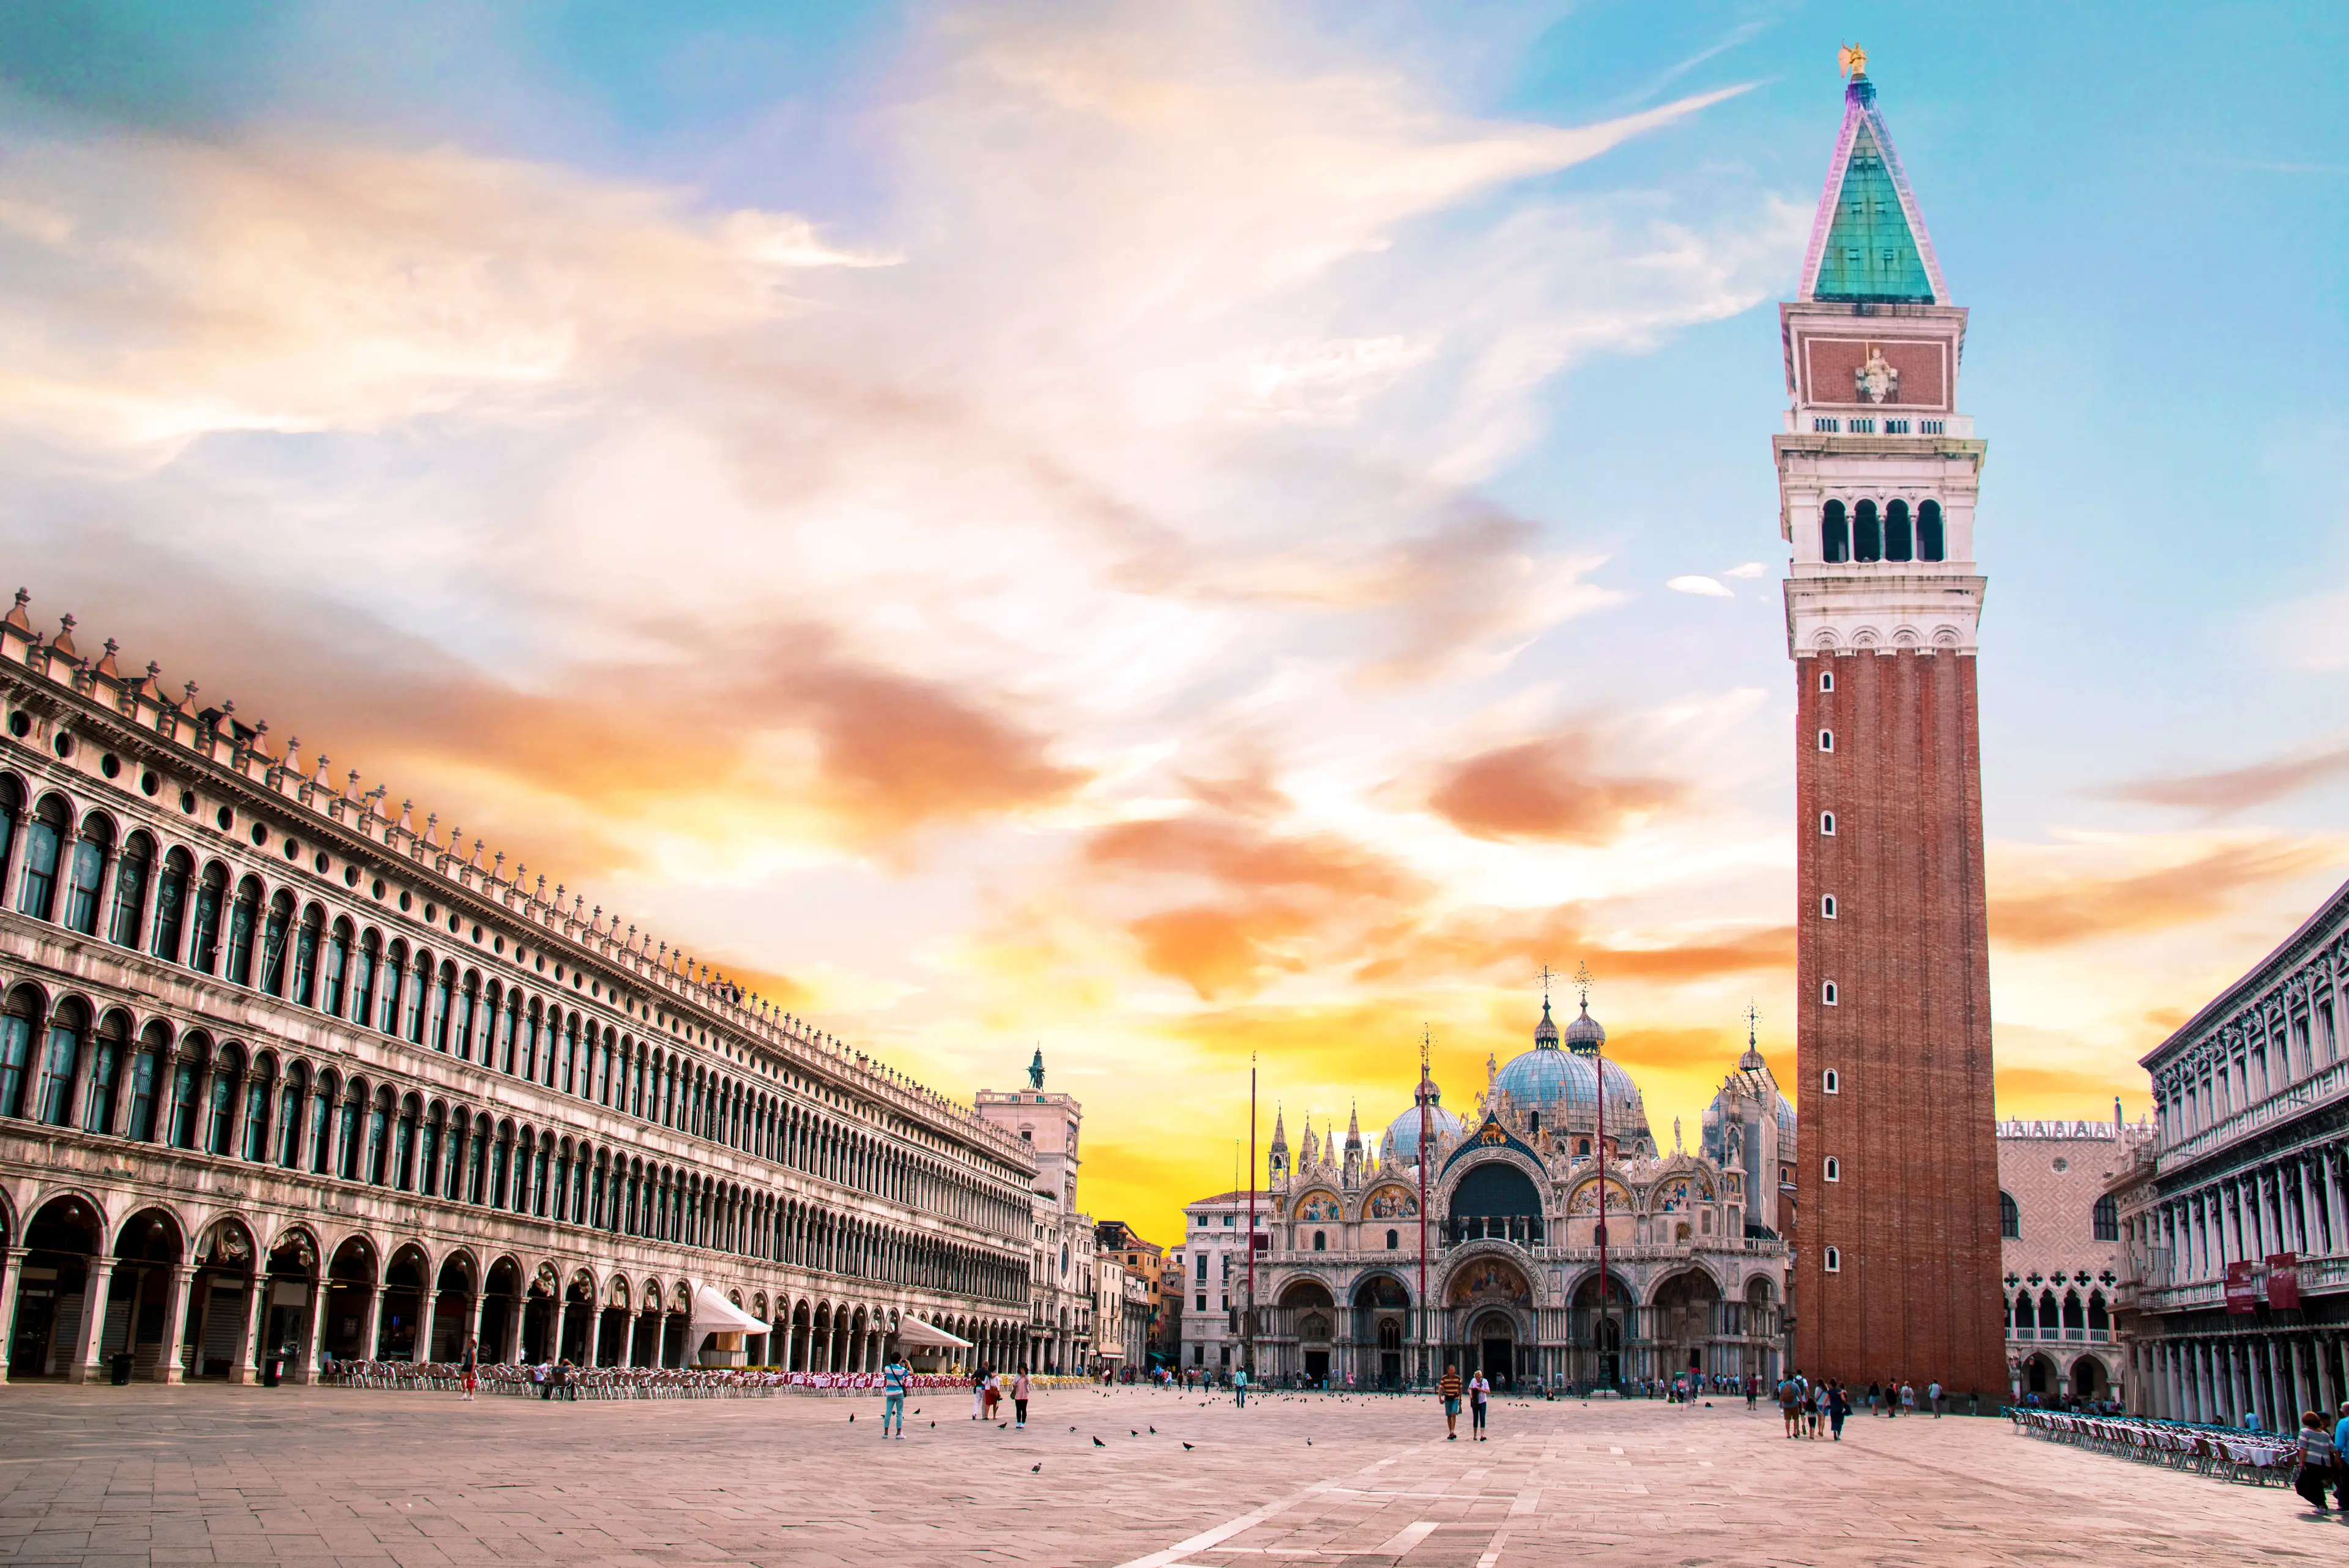 3-Day Venice Local Experience: Food, Wine, Shopping & Relaxation with Friends